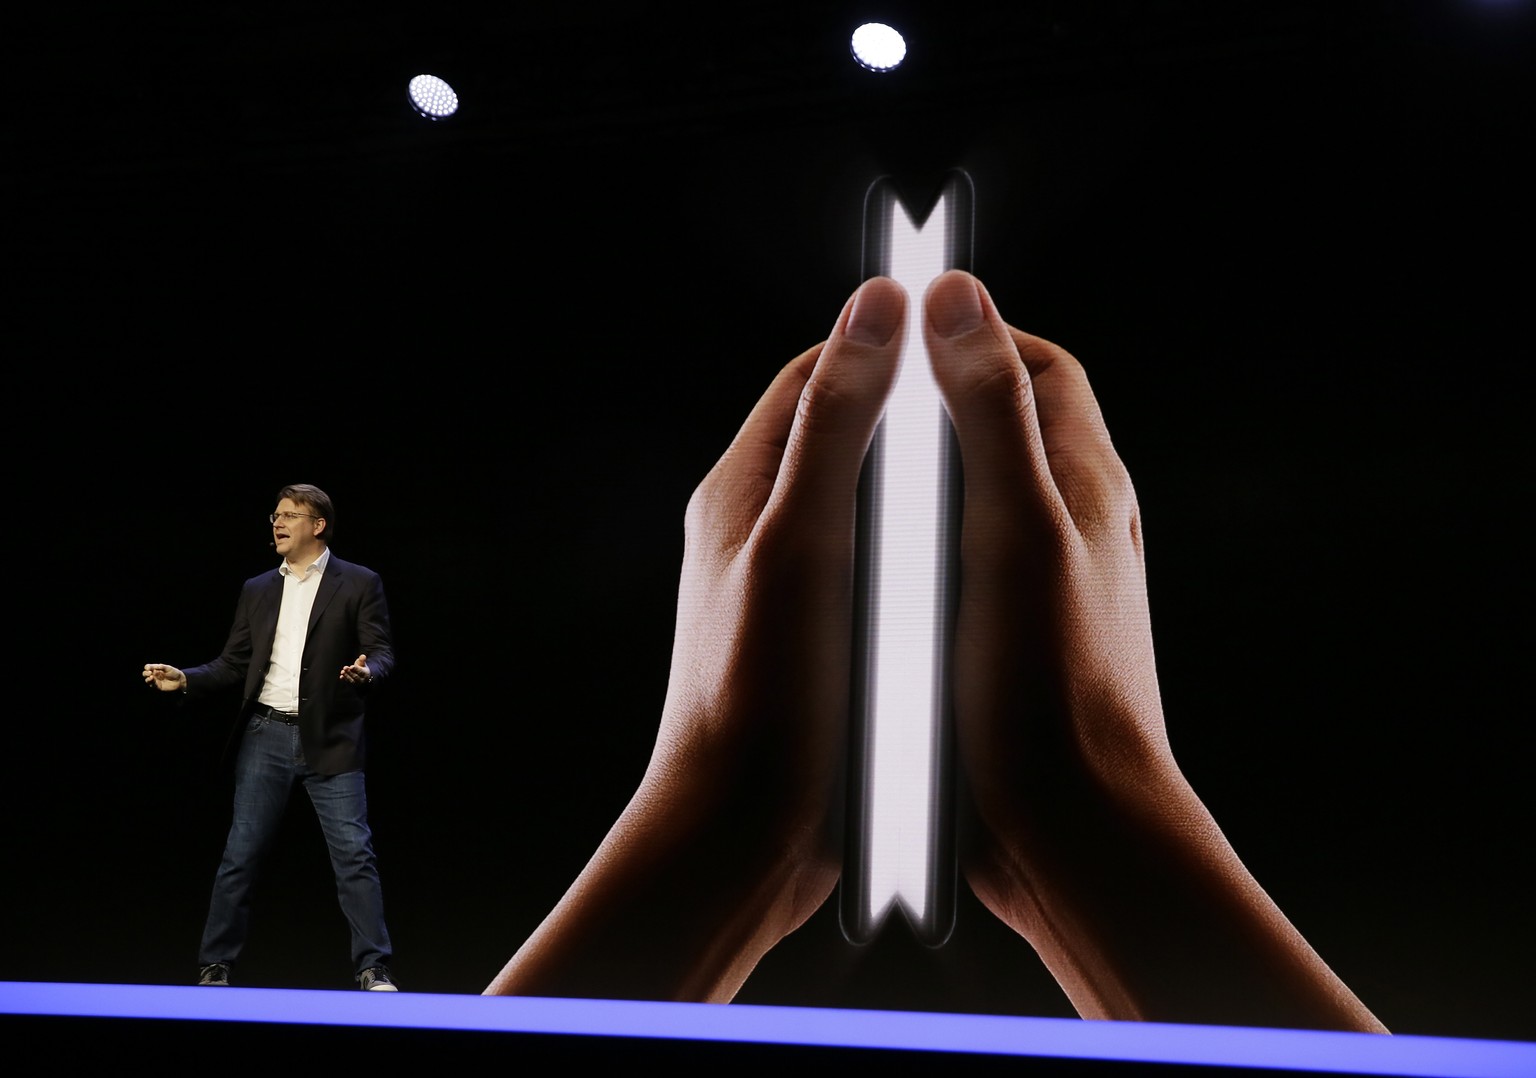 Justin Denison, SVP of Mobile Product Development, speaks about the Infinity Flex Display of a folding smartphone during the keynote address of the Samsung Developer Conference, Wednesday, Nov. 7, 201 ...